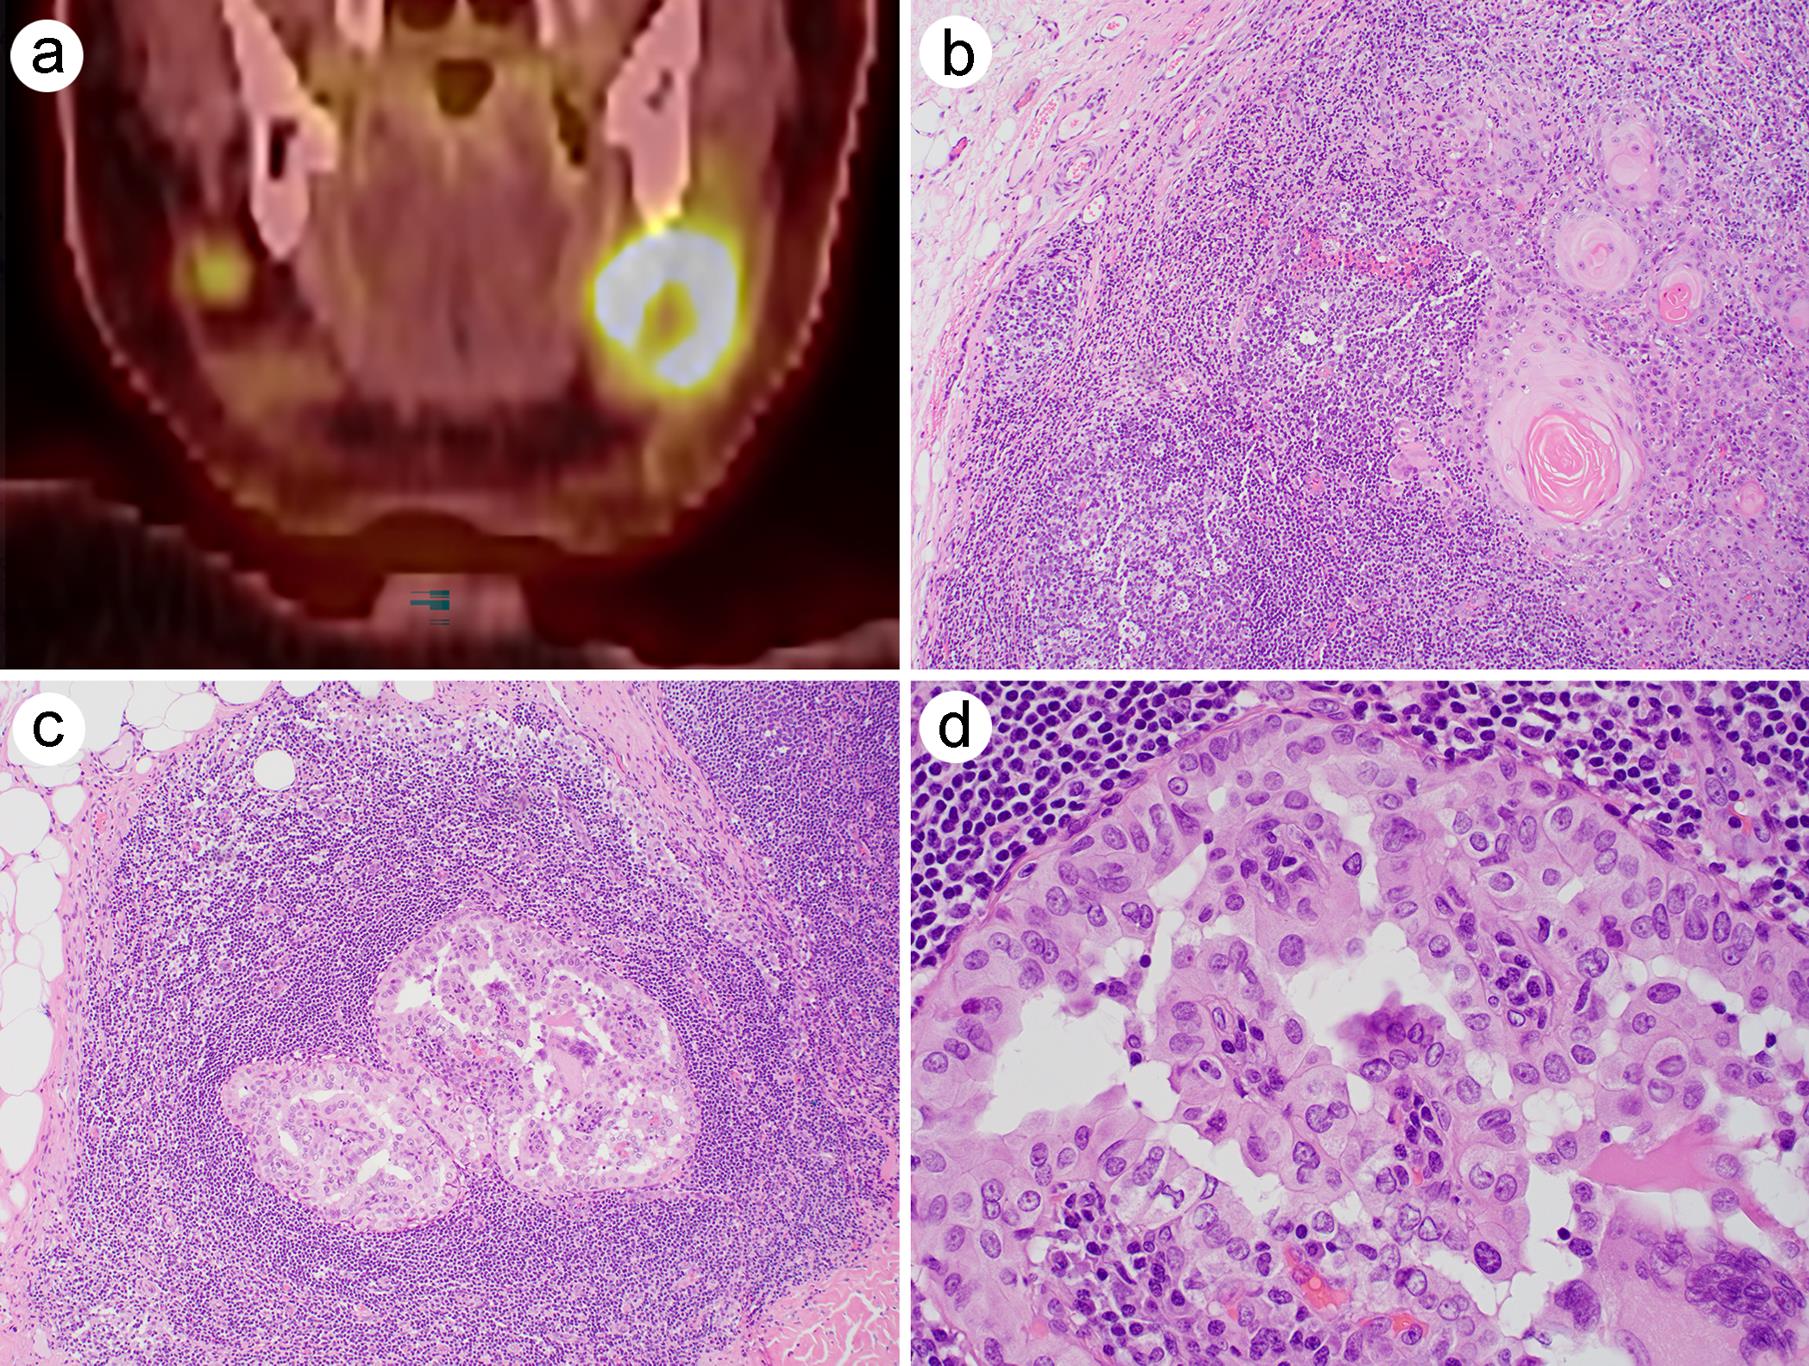 Incidental identified papillary thyroid carcinoma in the neck lymph node dissection of a 73-year-old male with s history of a lower lip squamous cell carcinoma.